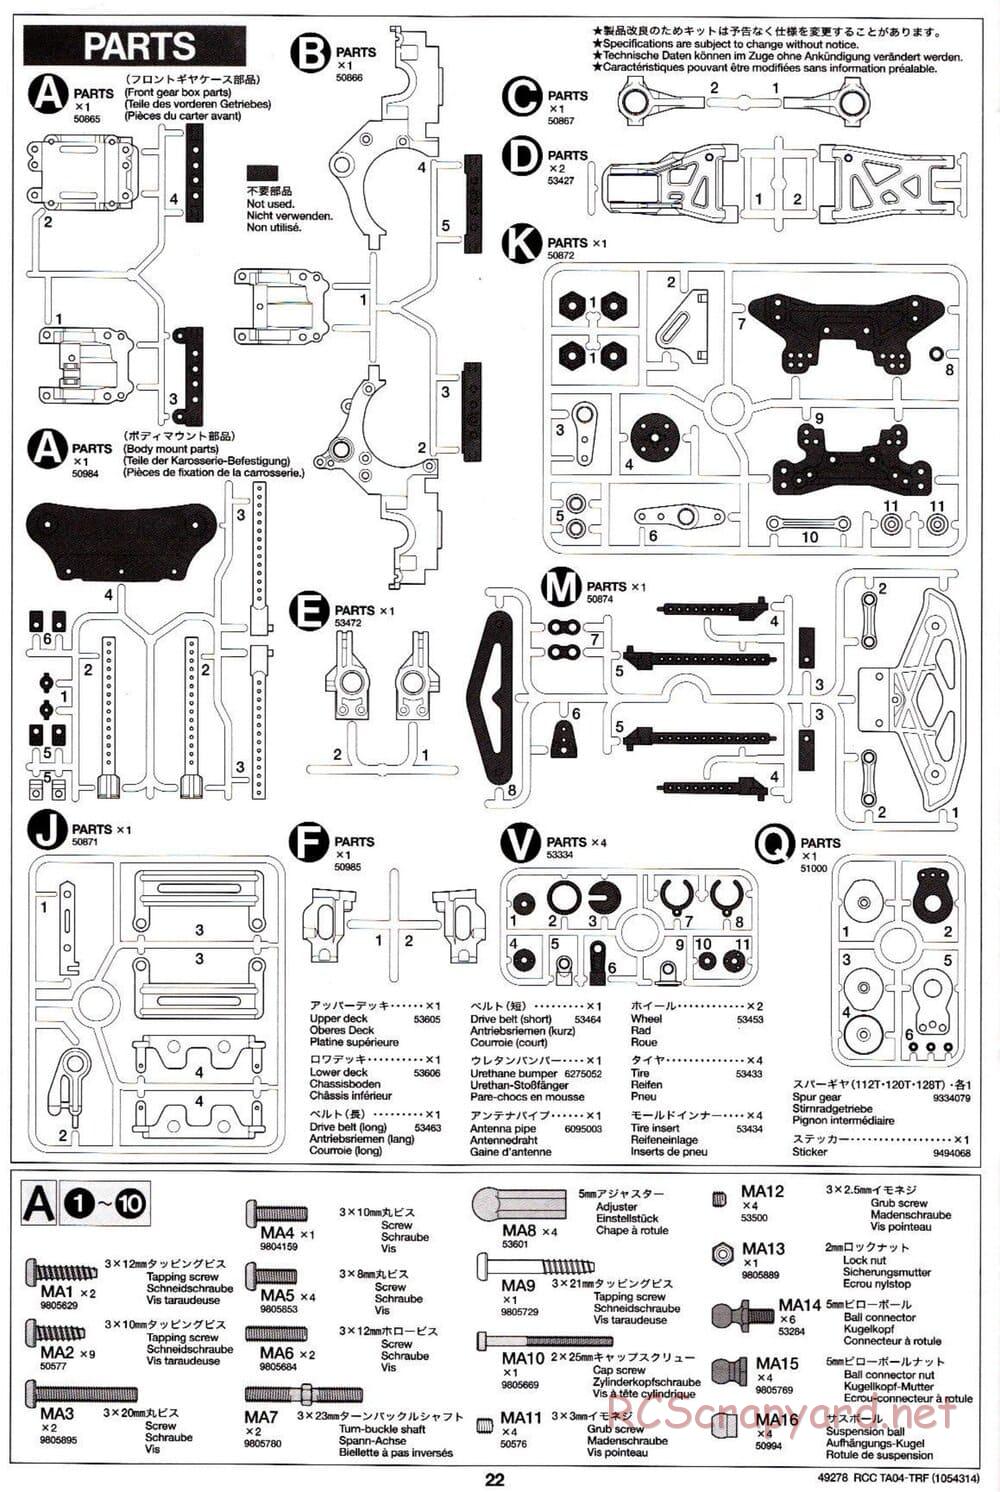 Tamiya - TA-04 TRF Special Chassis Chassis - Manual - Page 22